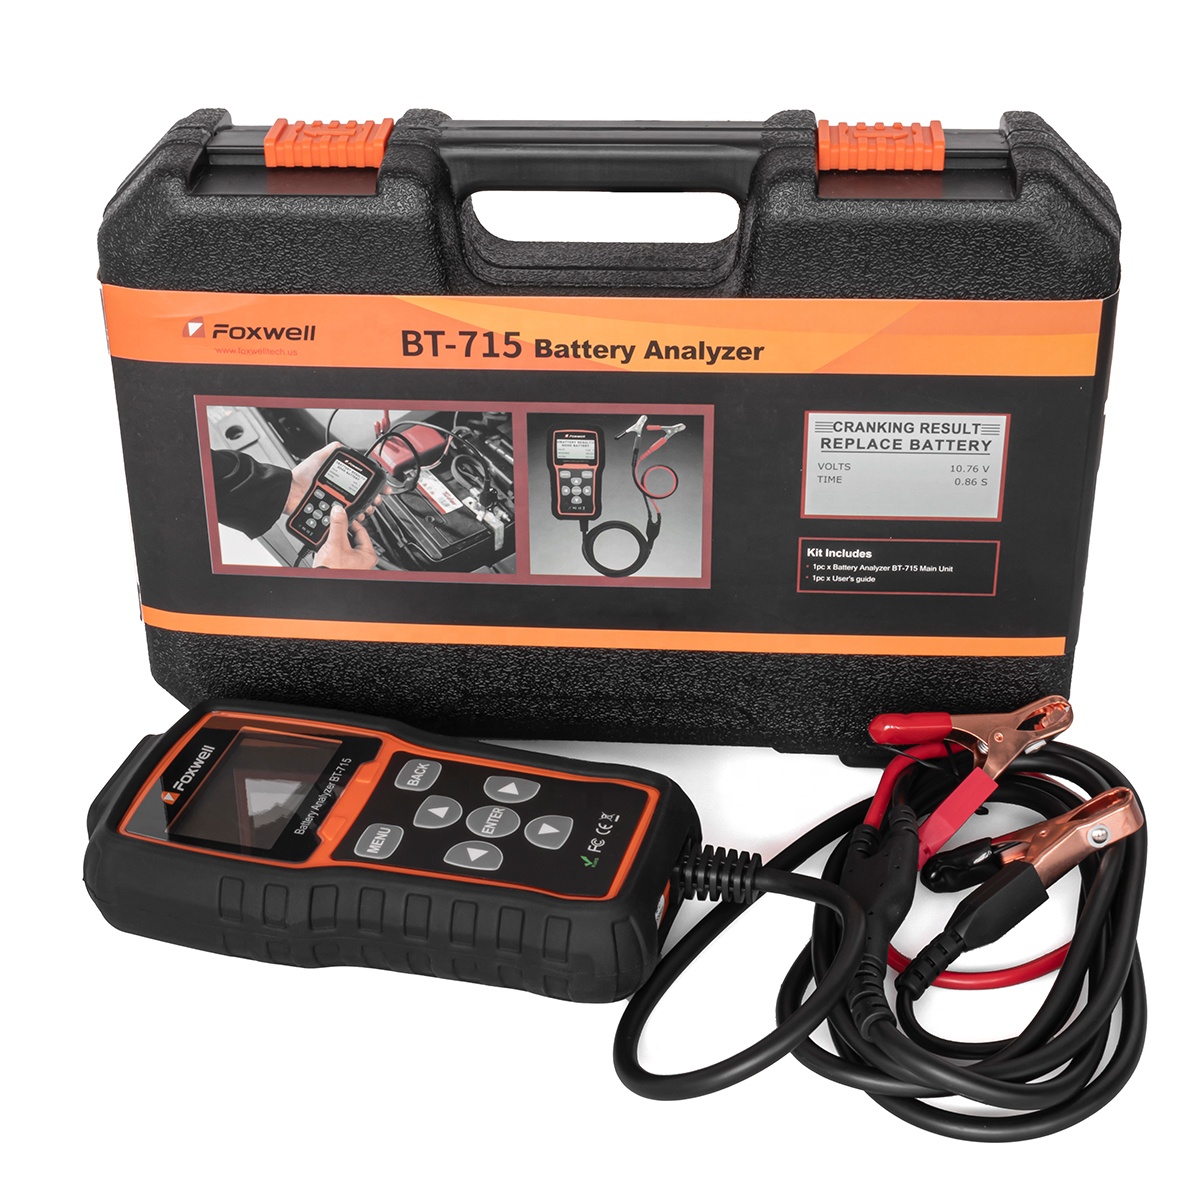 Hot Selling Foxwell BT-715 Battery Analyzer Support Multi-Language Car Fault Diagnostic Scanner Tool BT715 Battery Tester